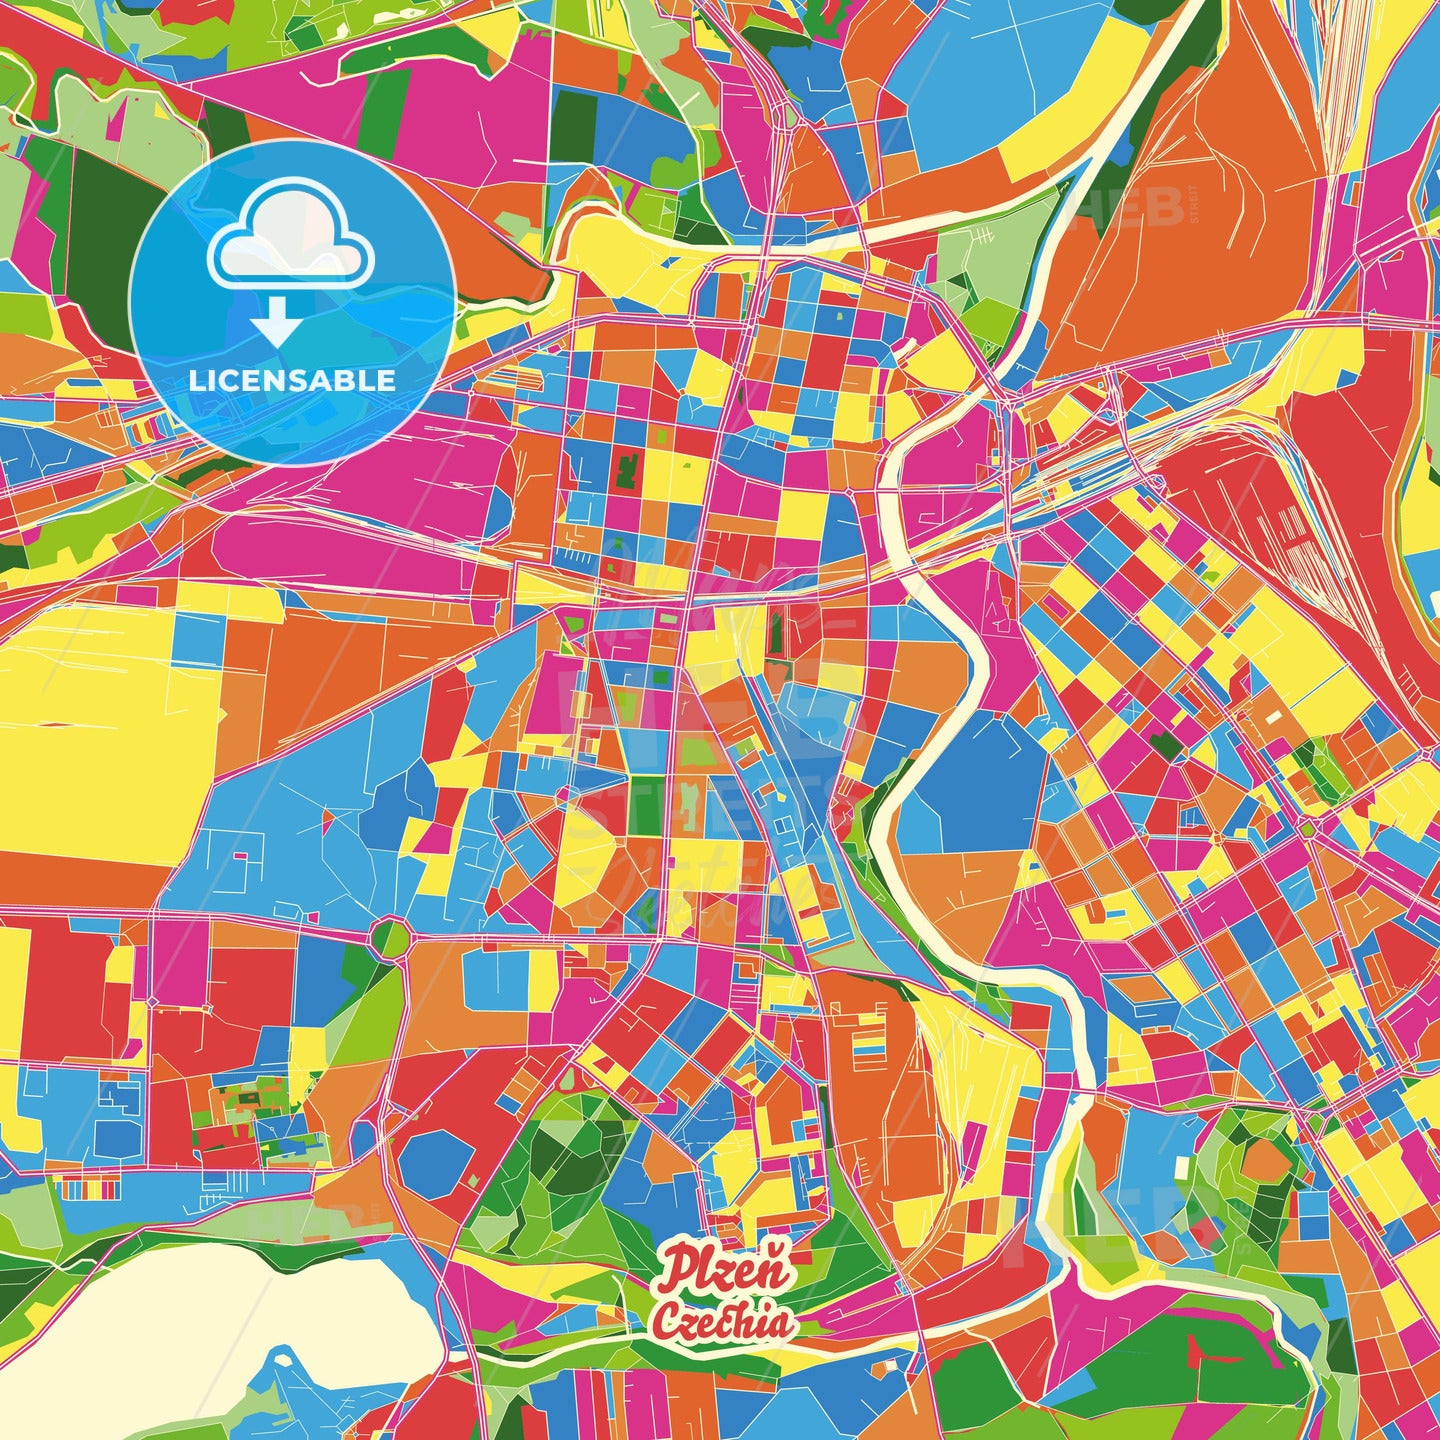 Plzeň, Czechia Crazy Colorful Street Map Poster Template - HEBSTREITS Sketches